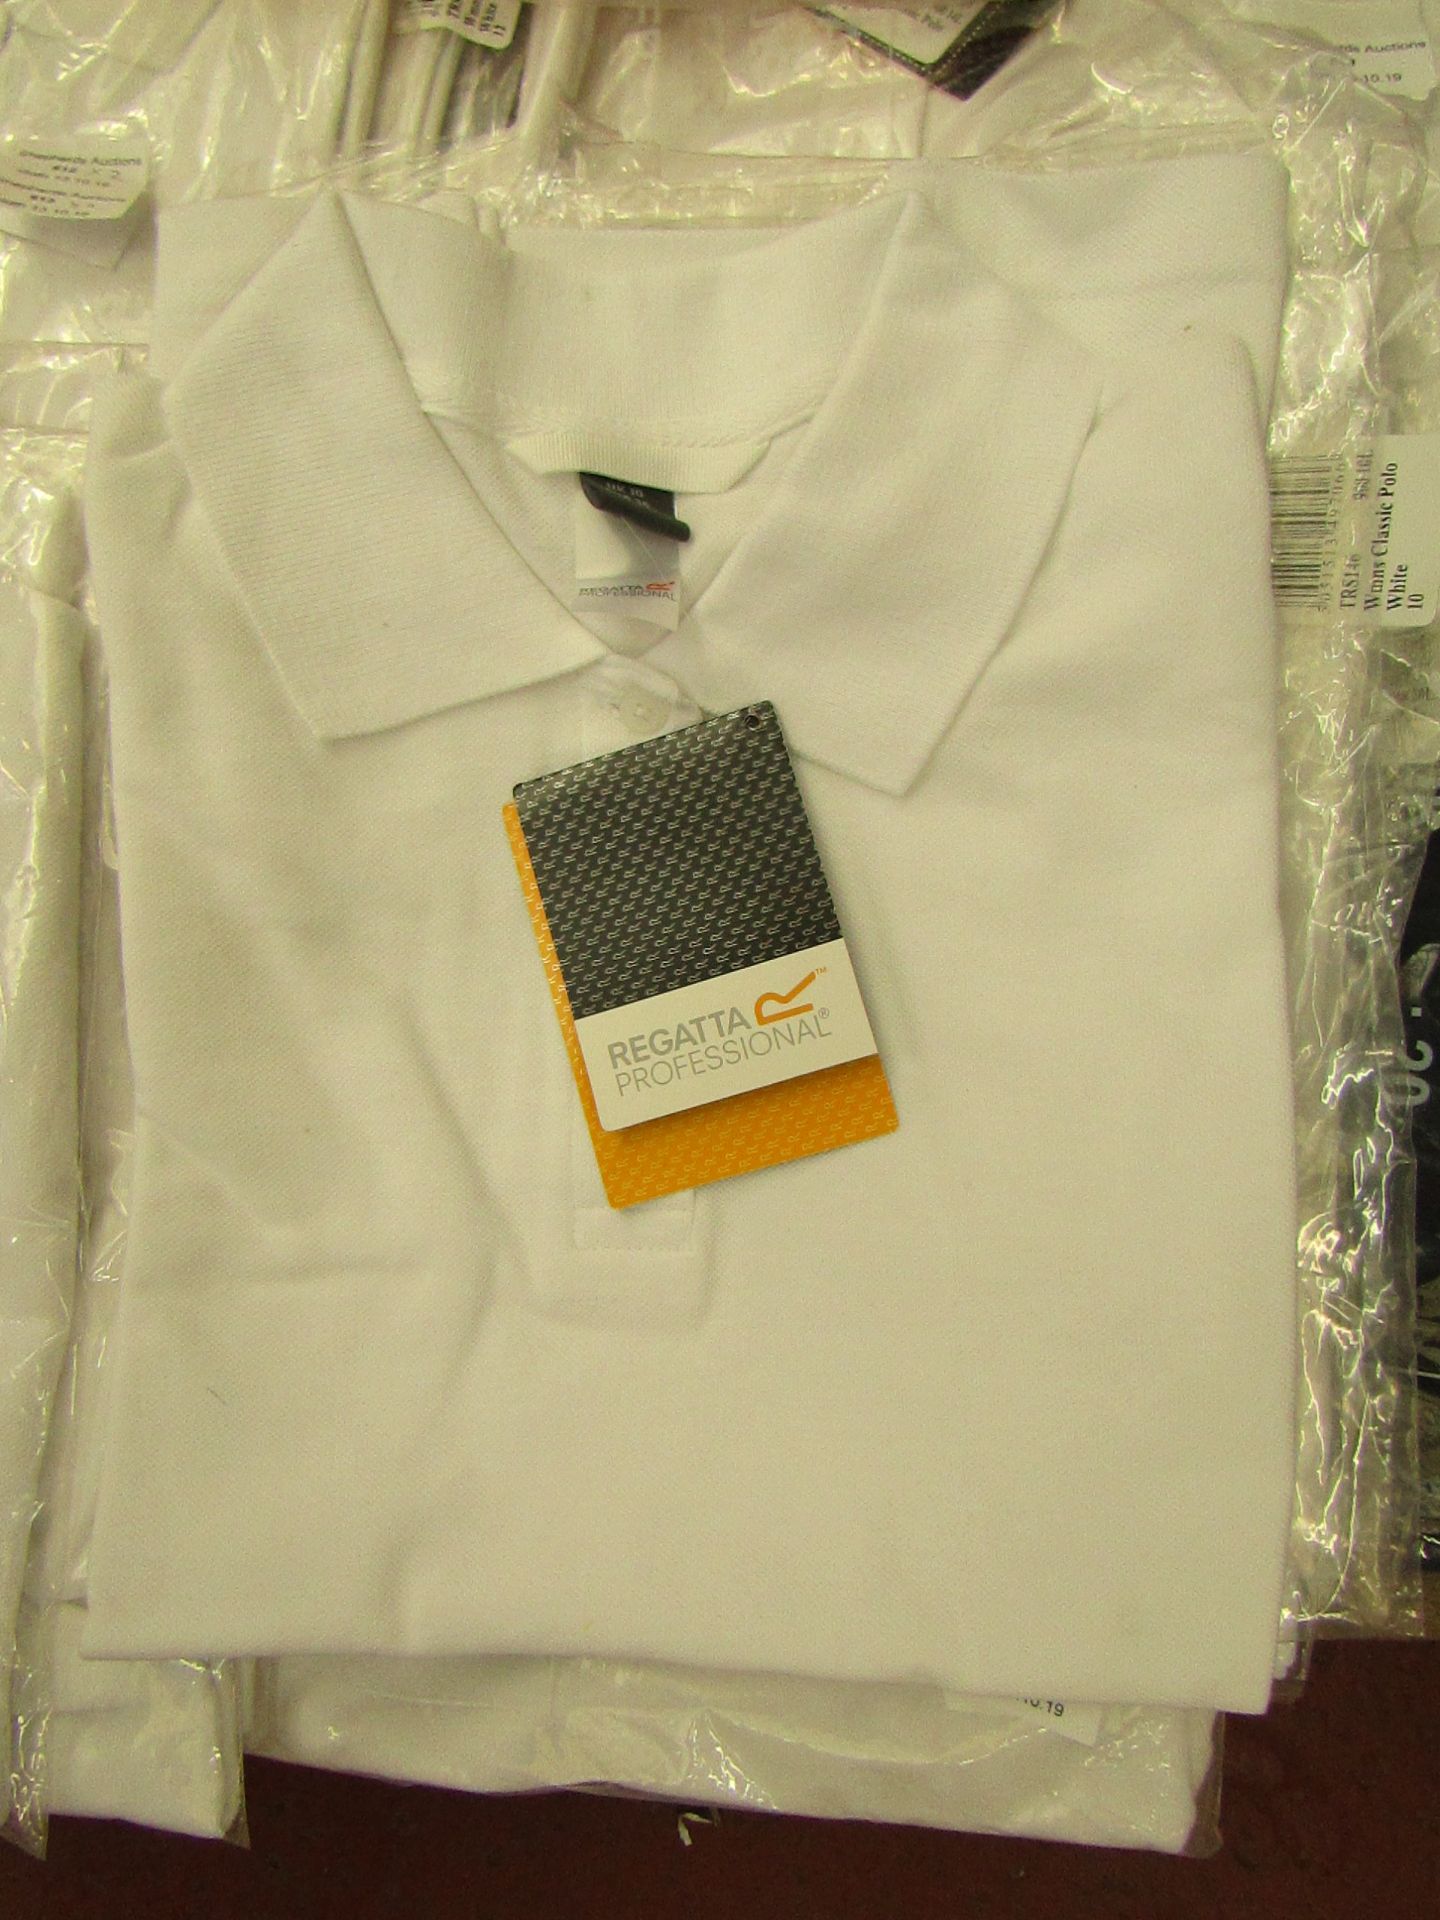 2 x Regatta Womens Classic Polo size 10 new & packaged